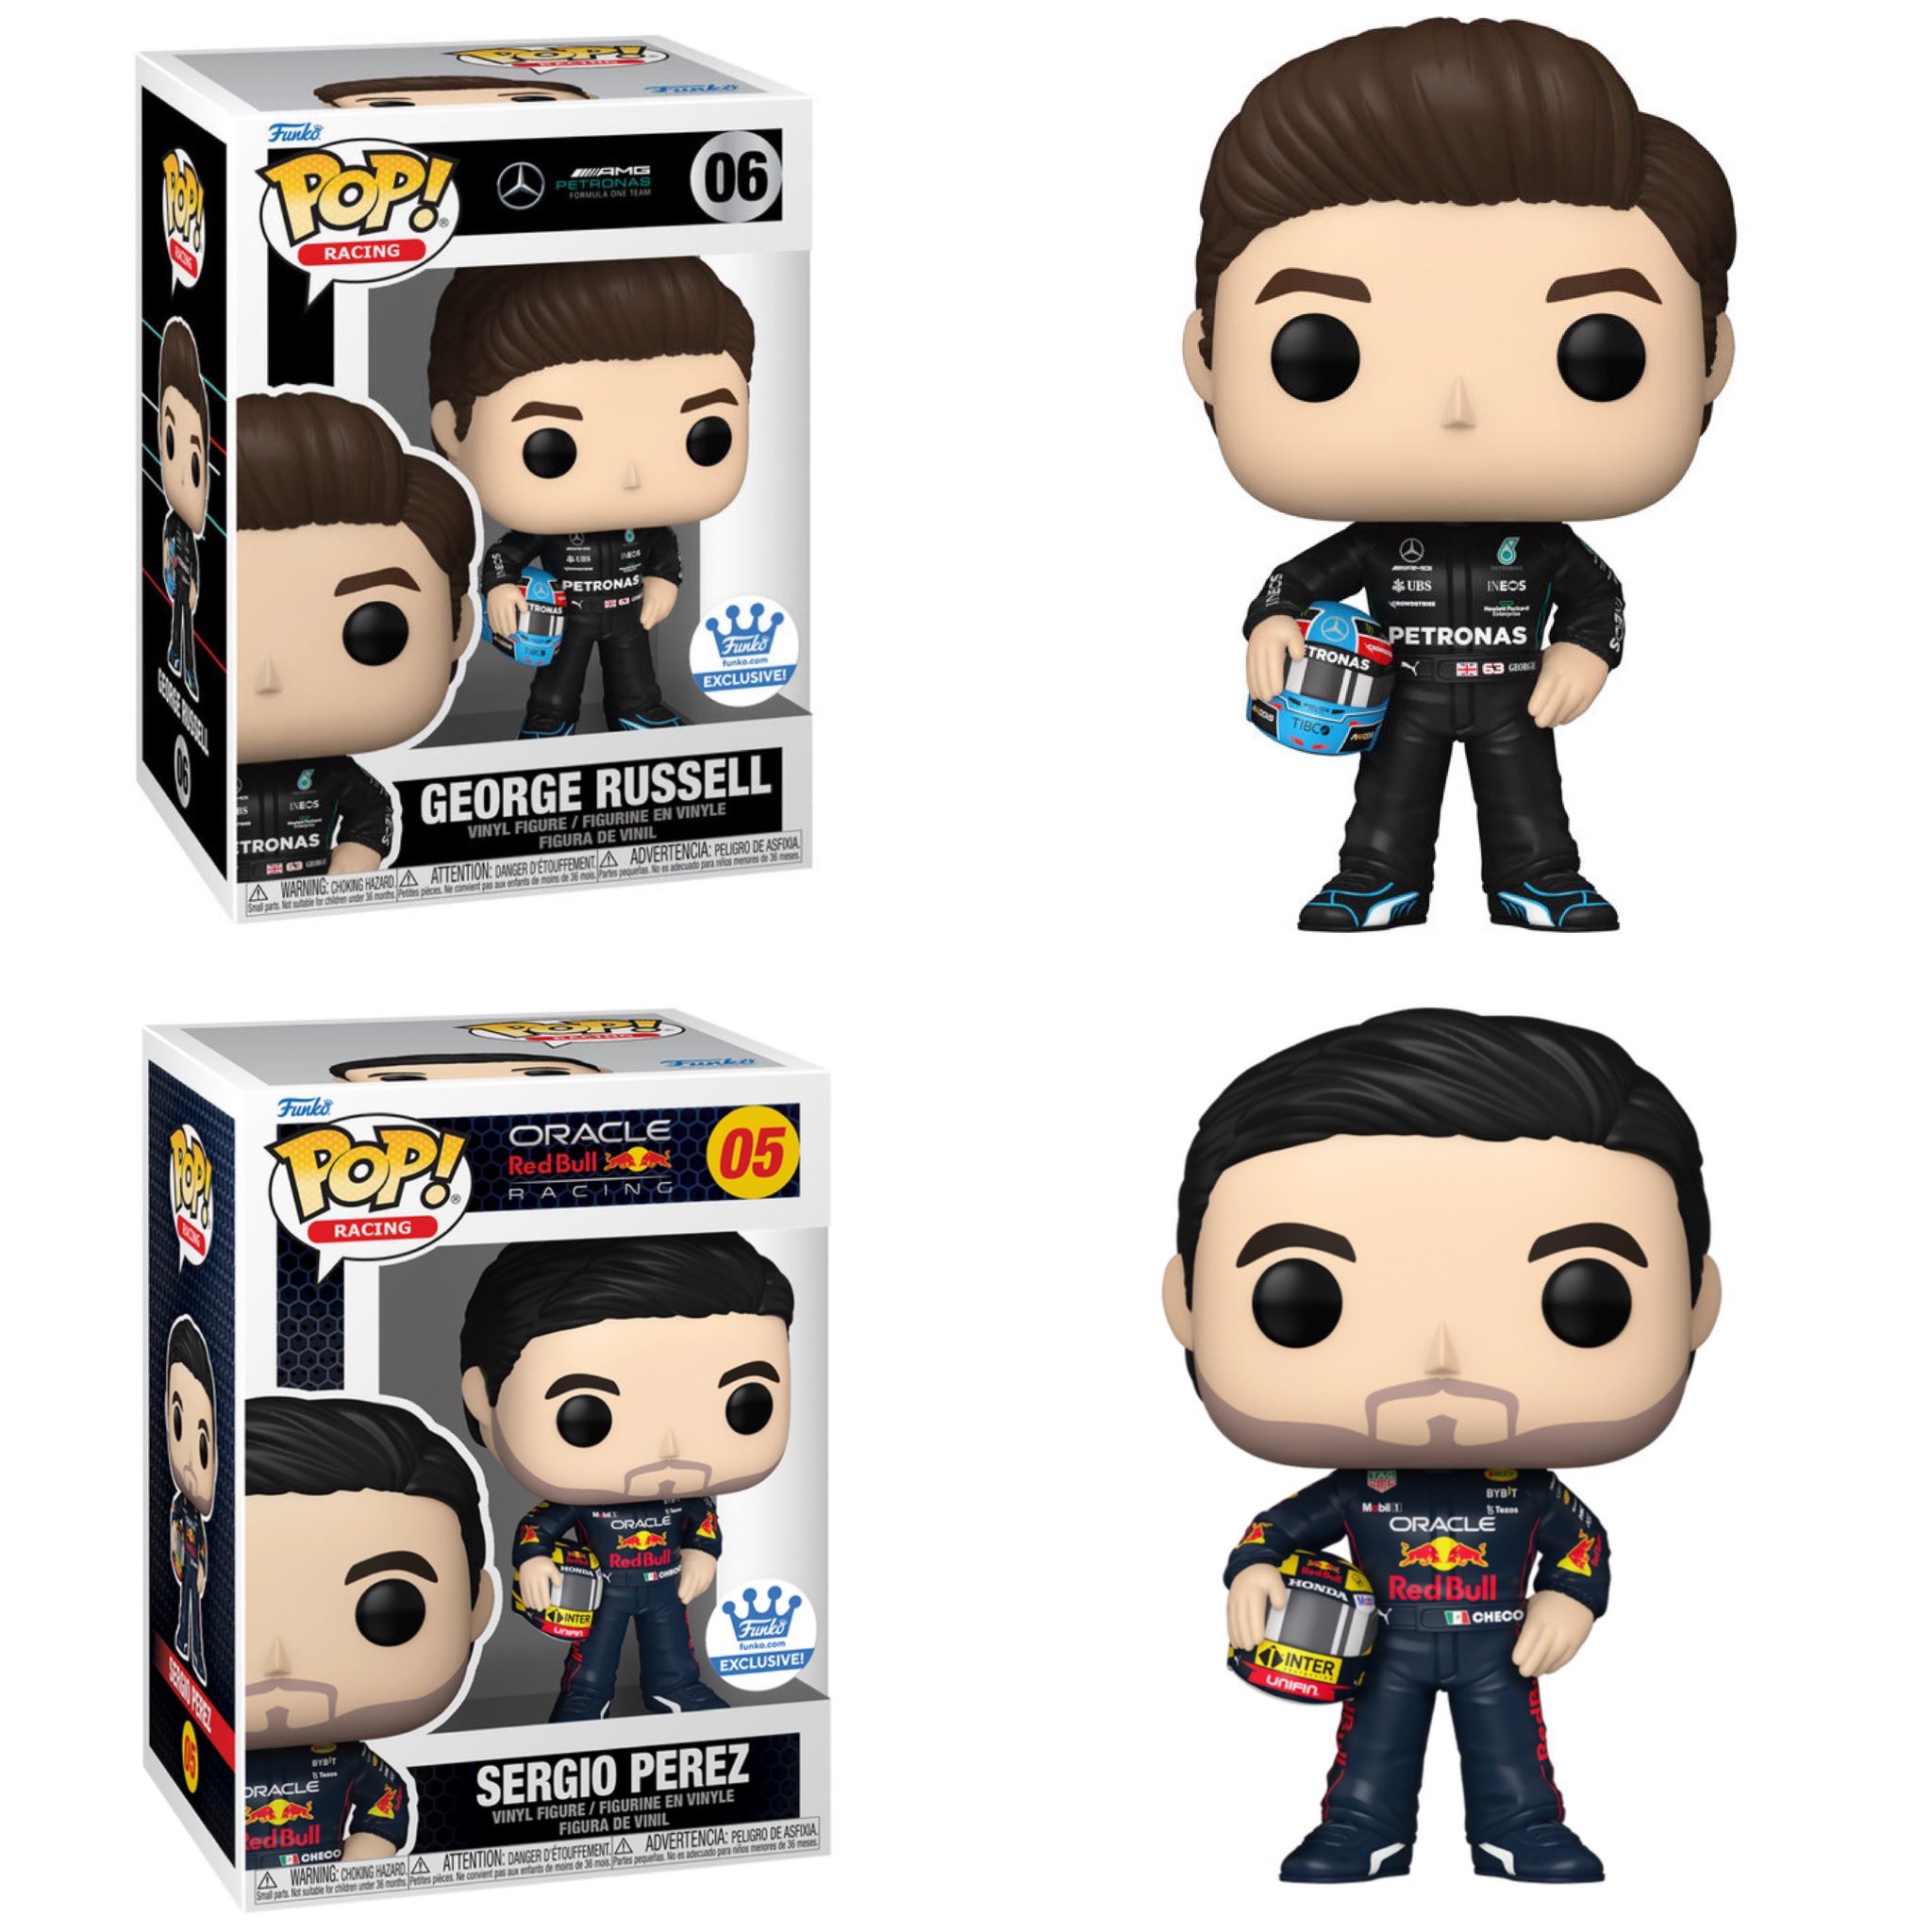 Funko POP News ! on X: First look at the new Funko Shop Formula 1  exclusives Sergio and George with Helmets in hand ~ #Formula1 #F1 #FPN  #FunkoPOPNews #Funko #POP #POPVinyl #FunkoPOP #